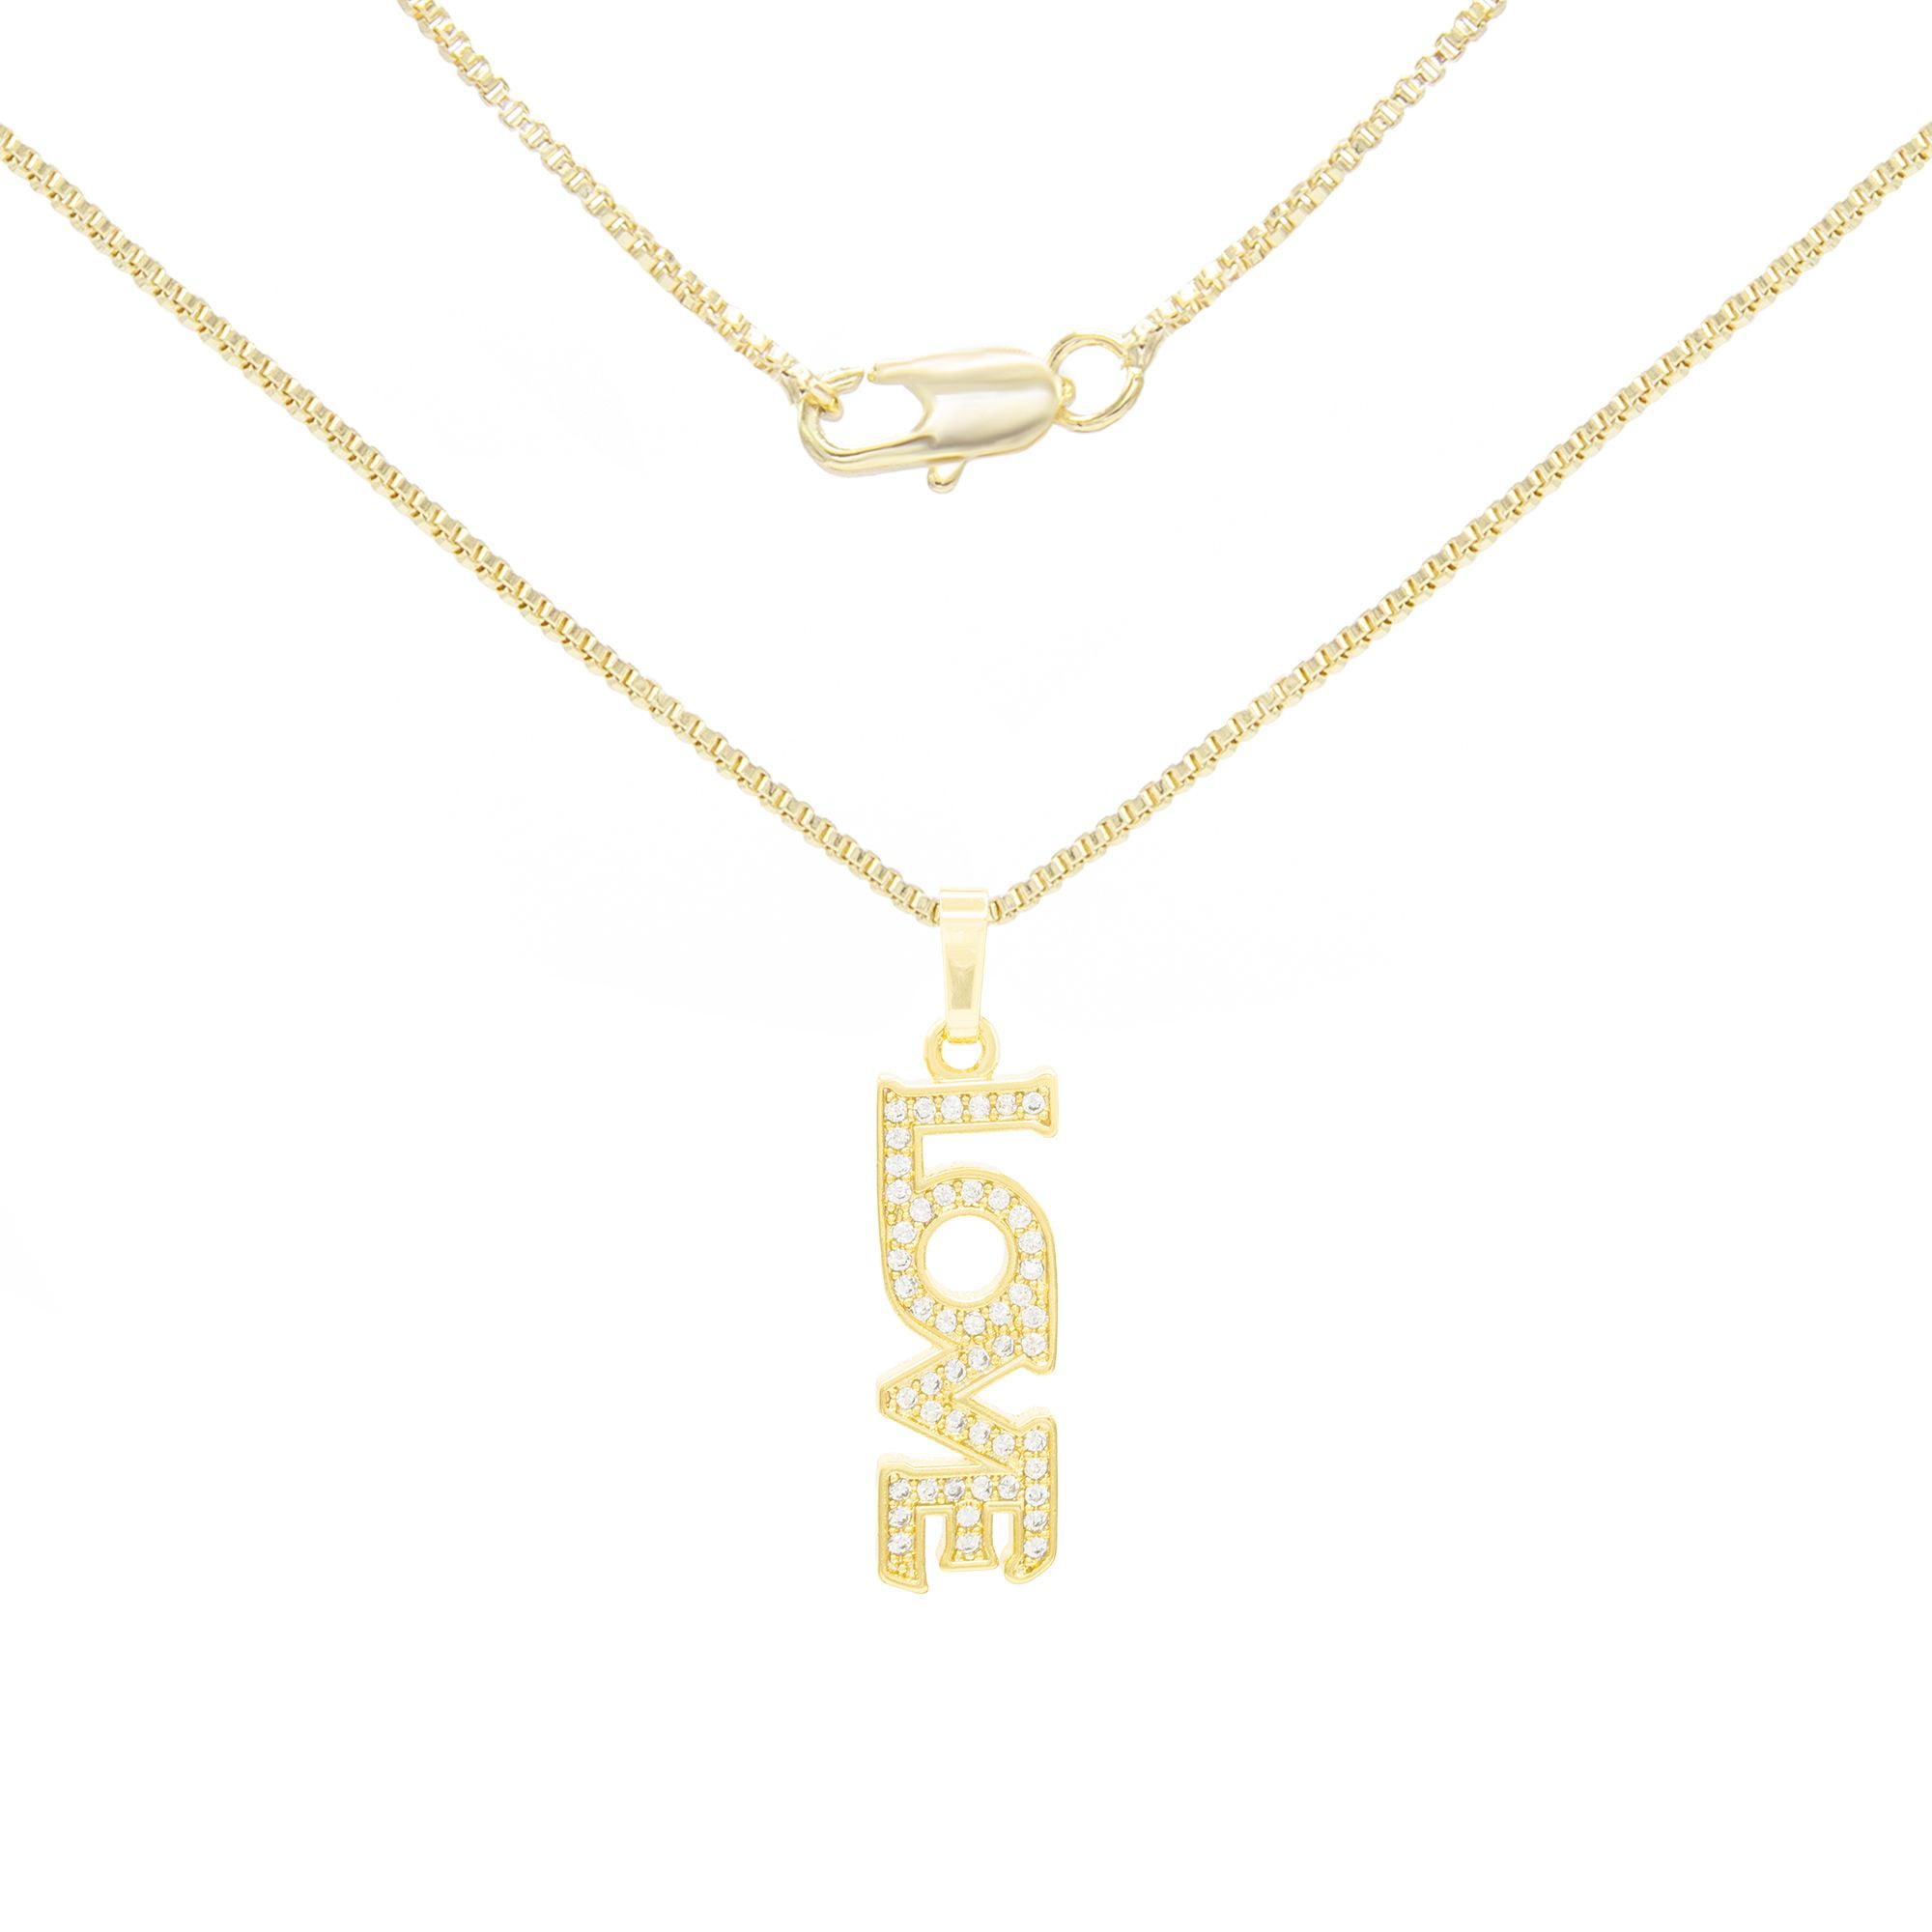 Cubic Zirconia 24 Necklace set in 14K Yellow Gold with Spring Lock